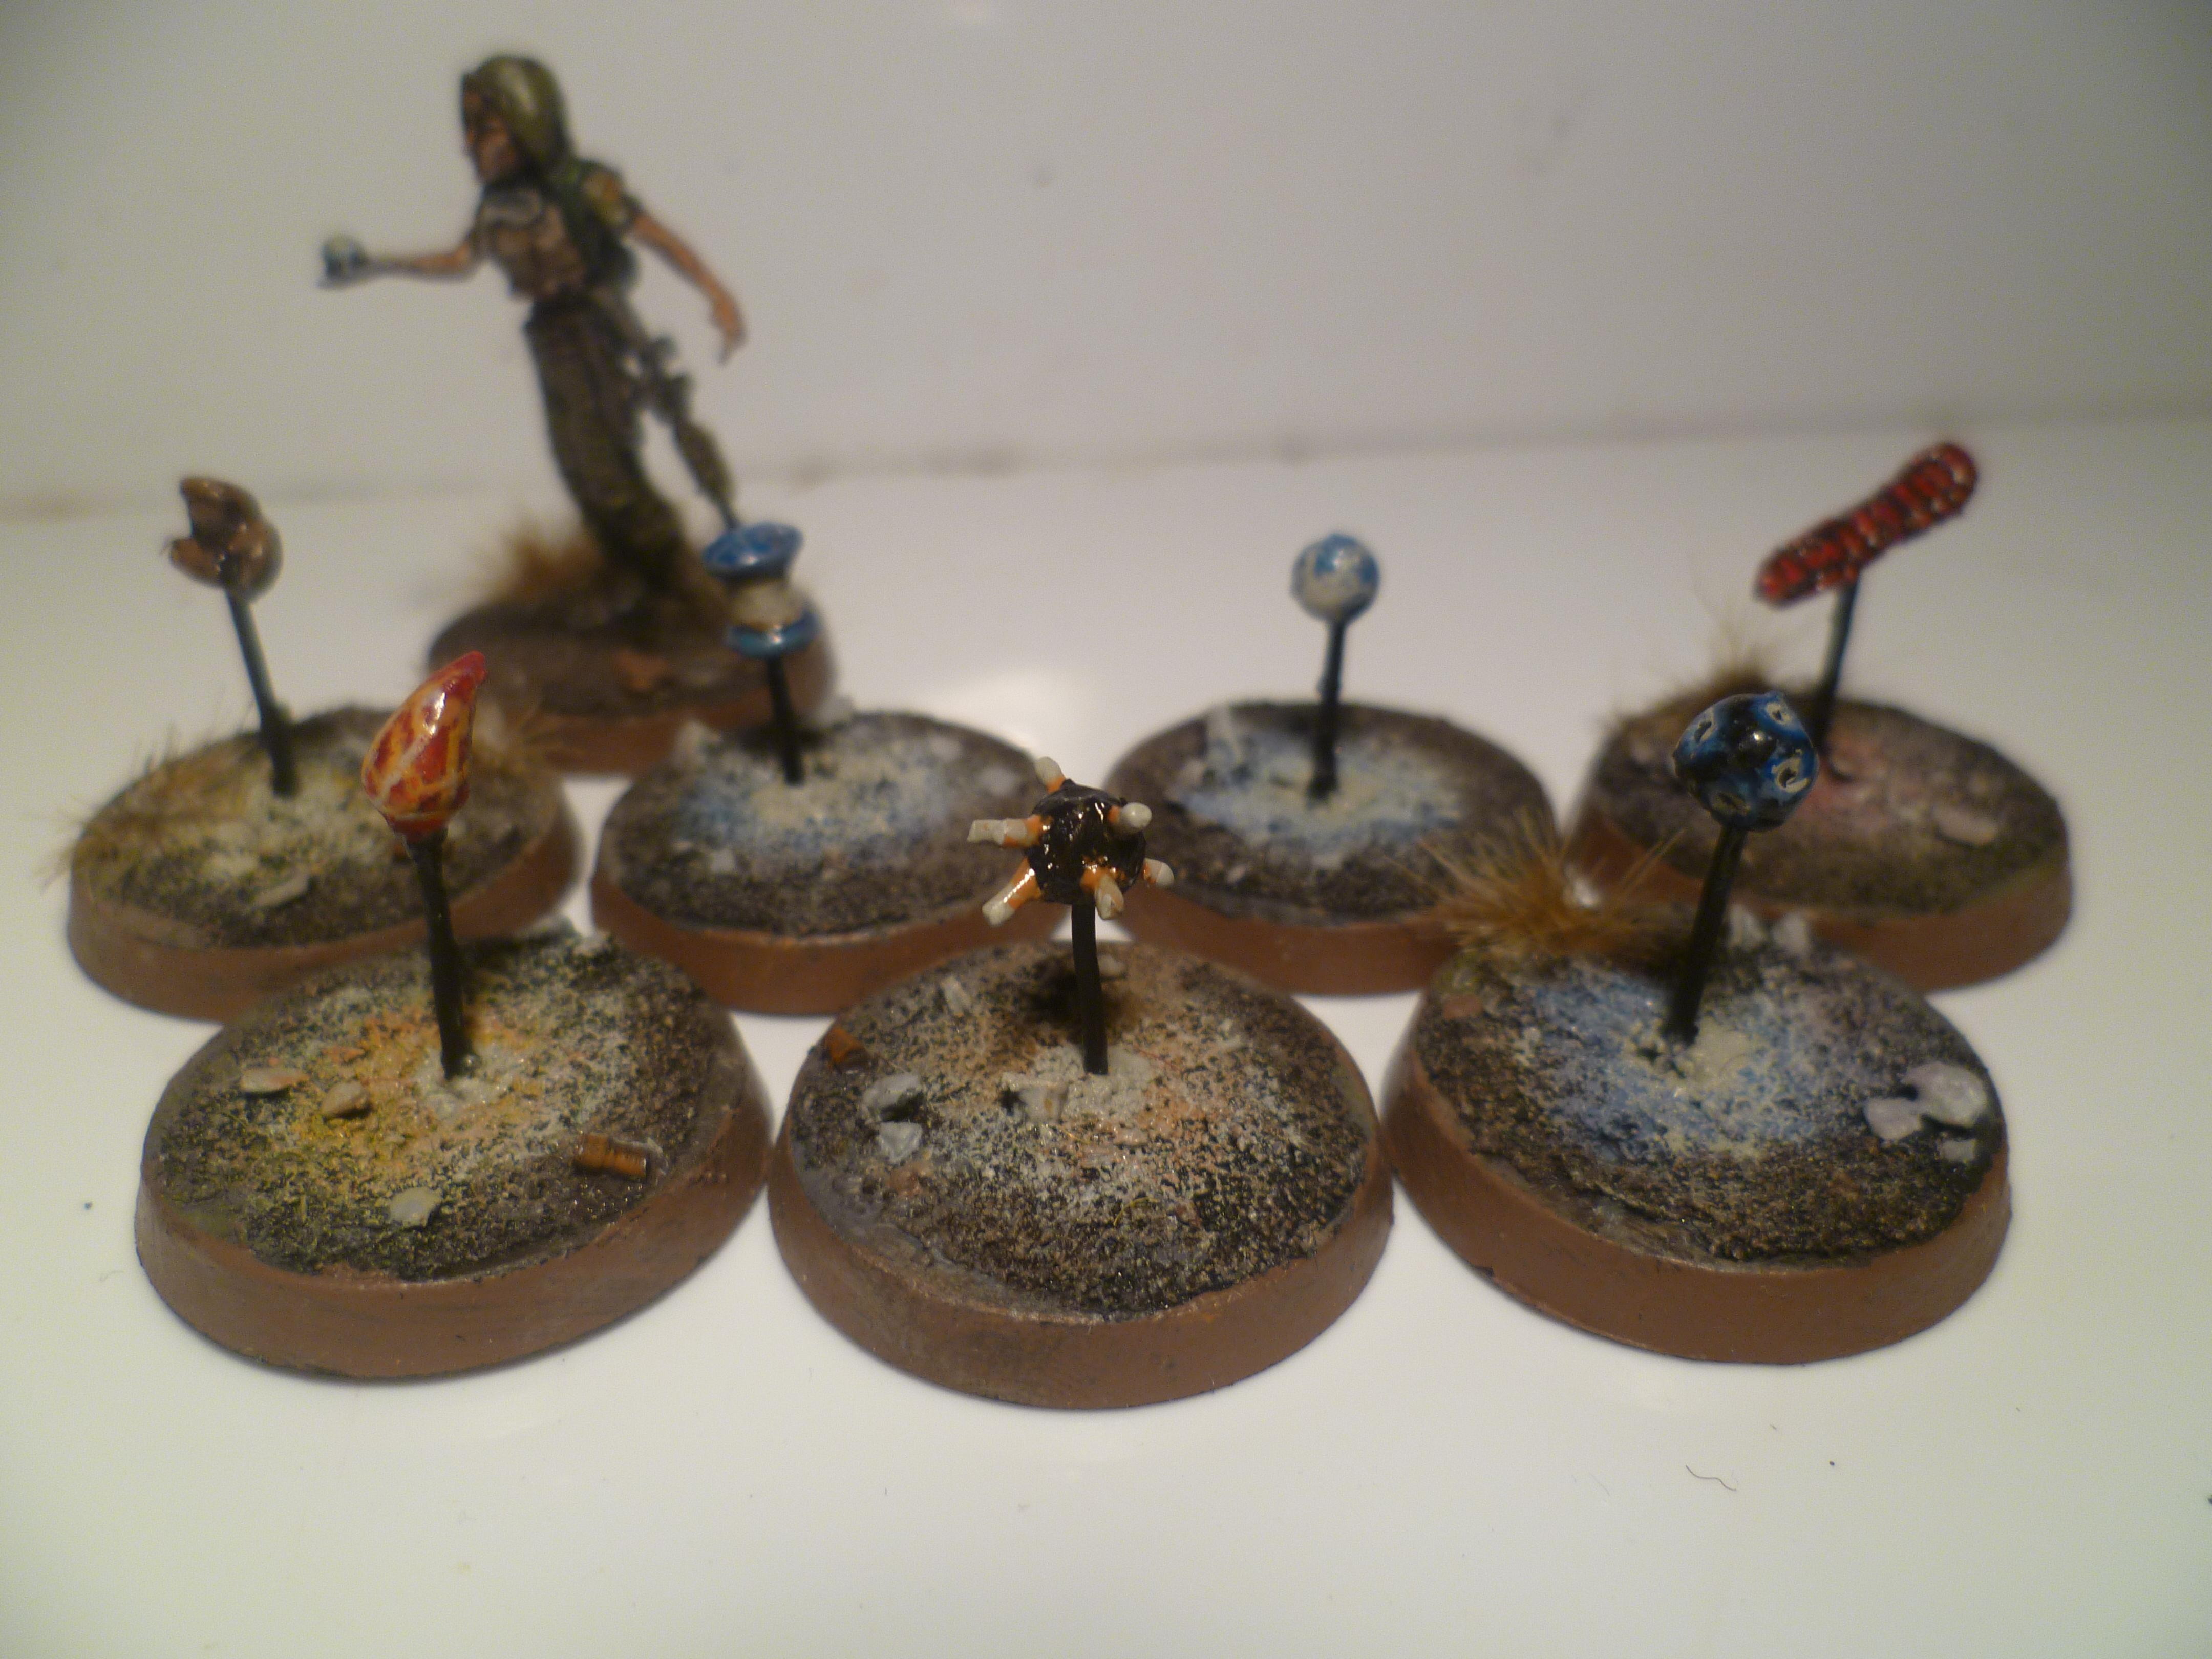 28mm, Apocalyptic, Artefact, Artifact, Fi, Markers, Modern, Objective Marker, Post, Sci